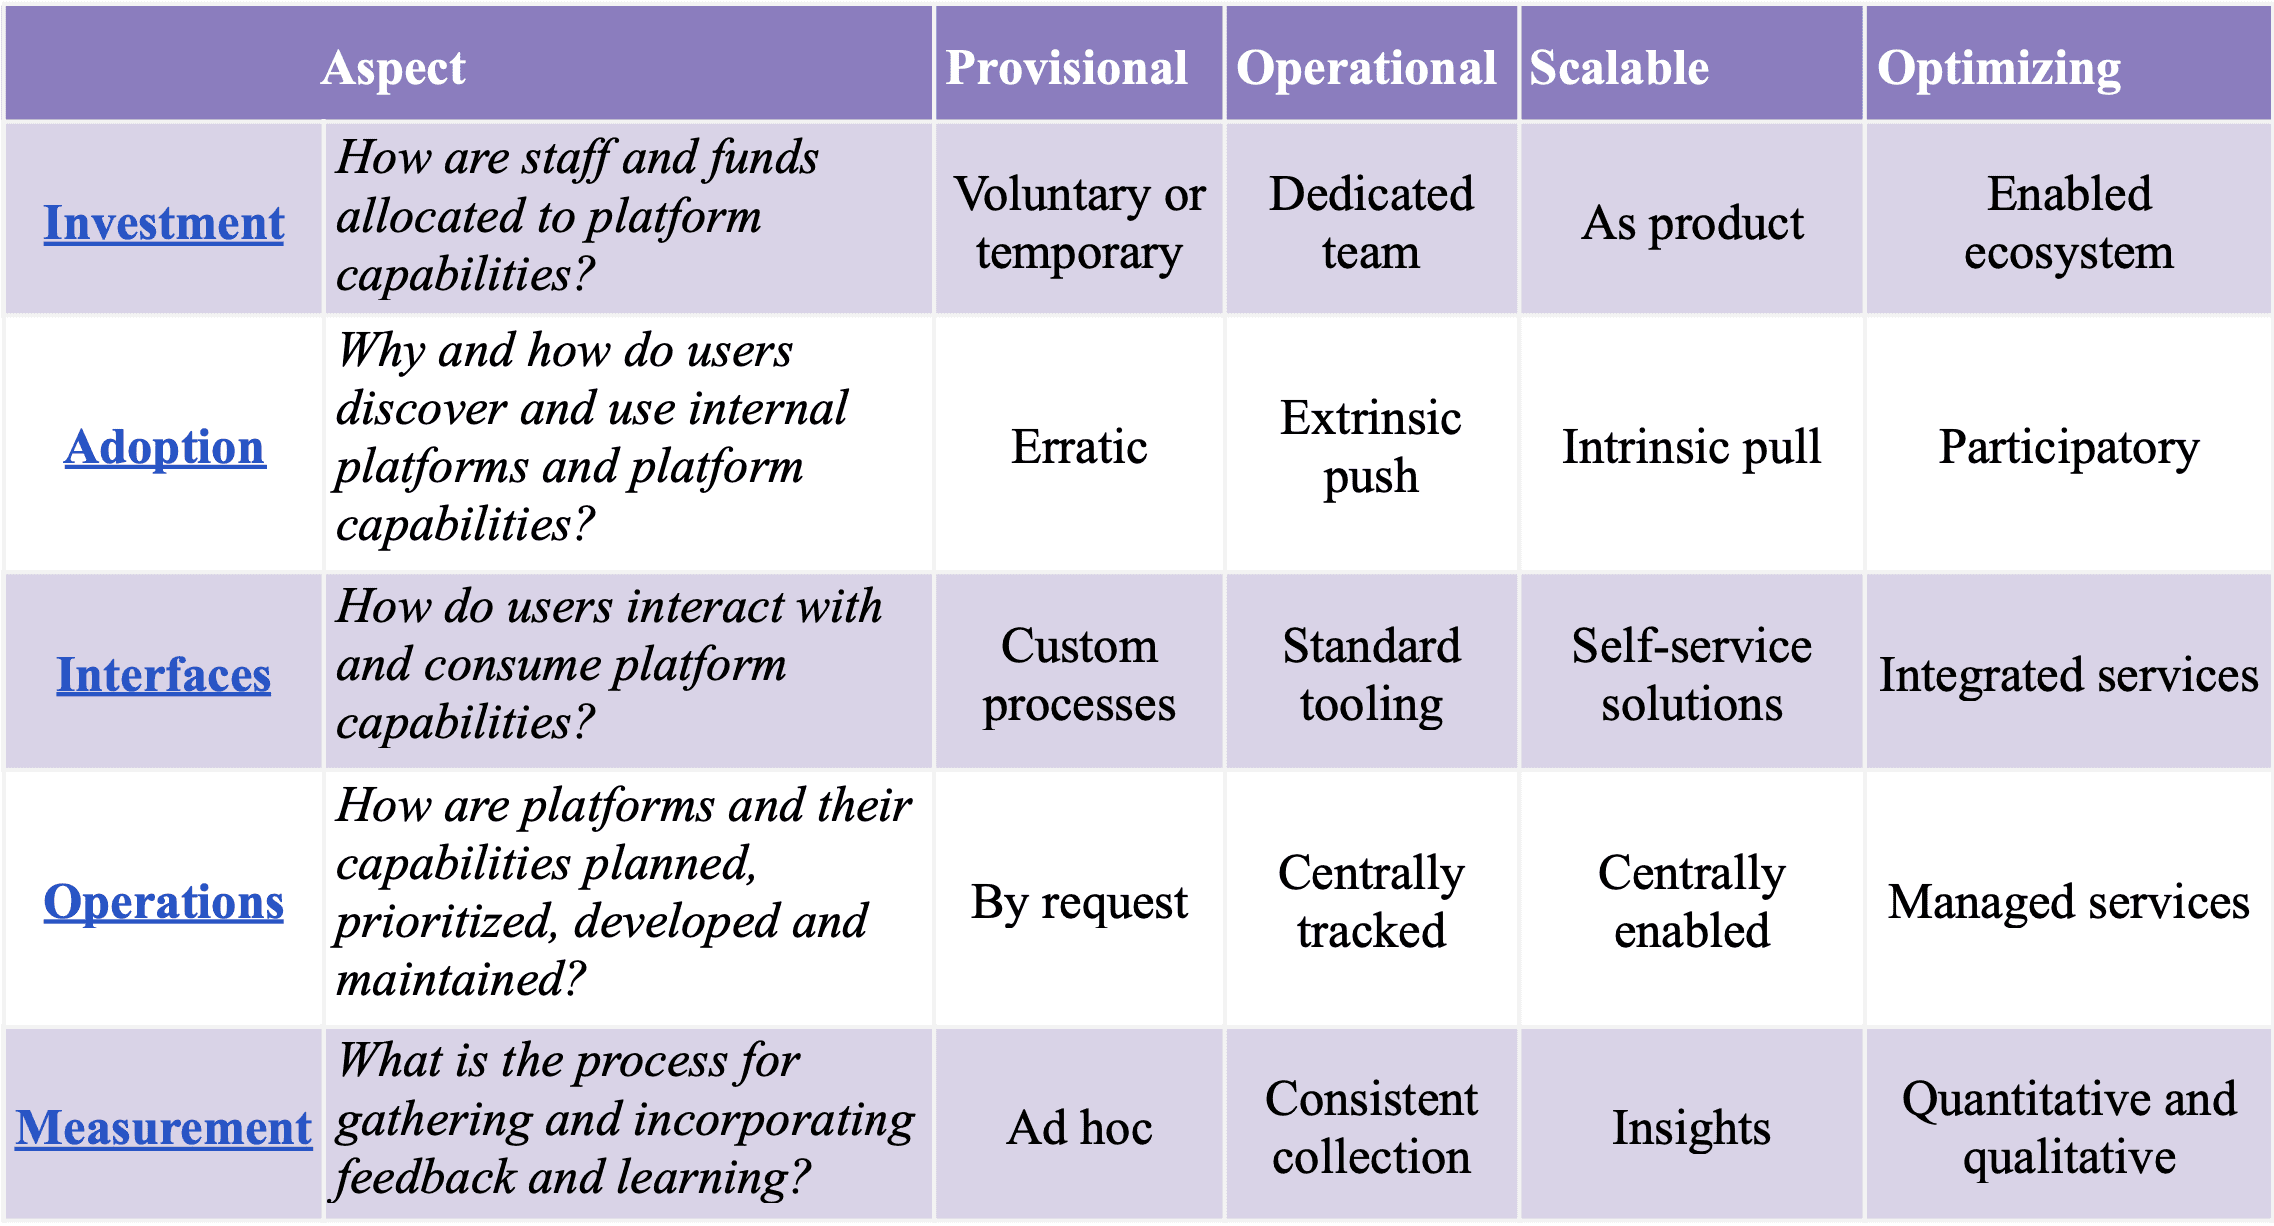 Table showing 5 aspects and 4 level of maturity